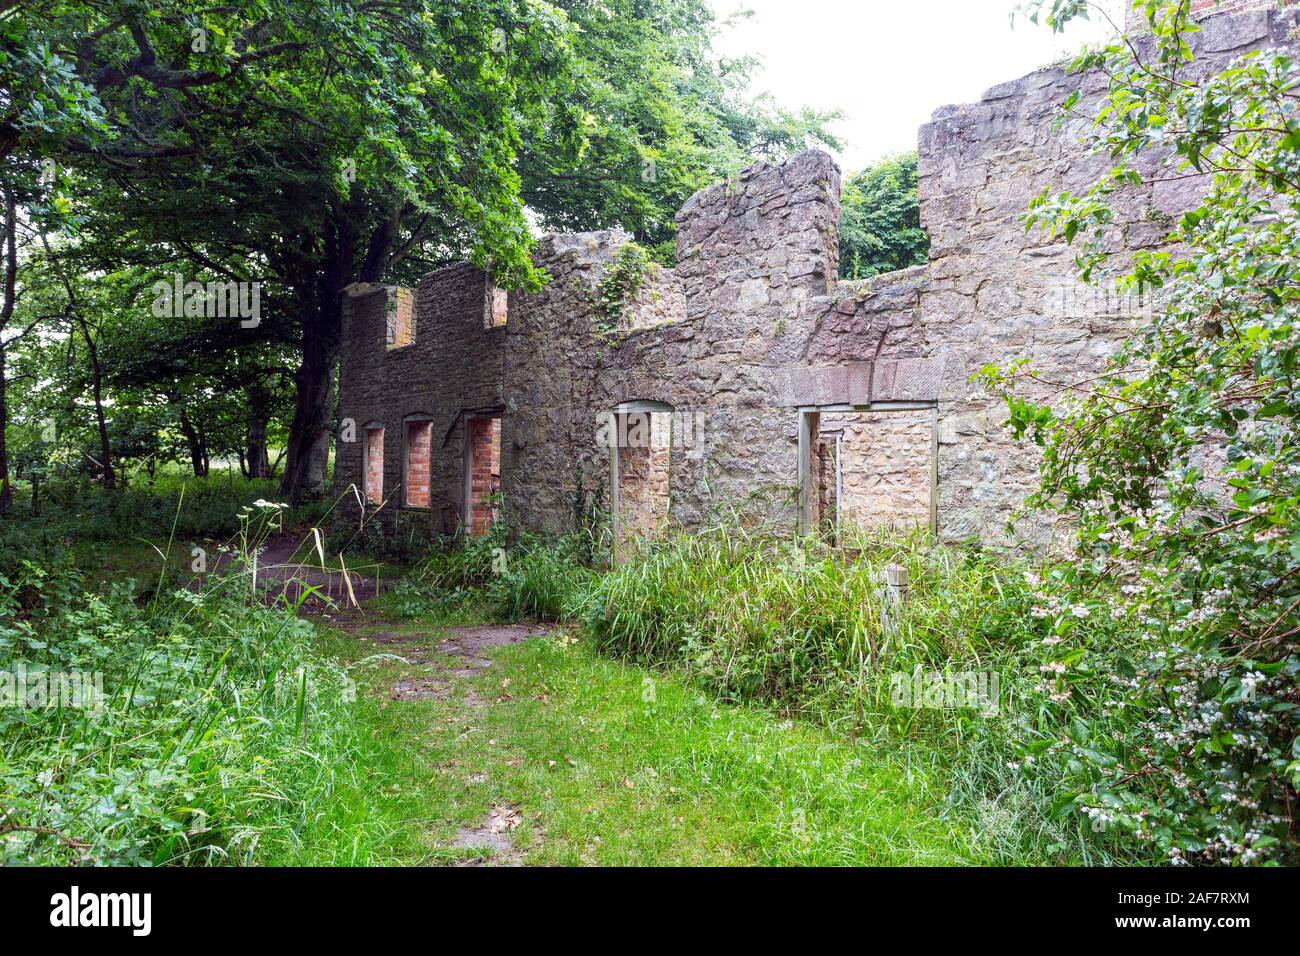 One of the ruined cottages, now roofless and slowly being reclaimed by nature in the abandoned village of Tyneham, Dorset, England, UK Stock Photo